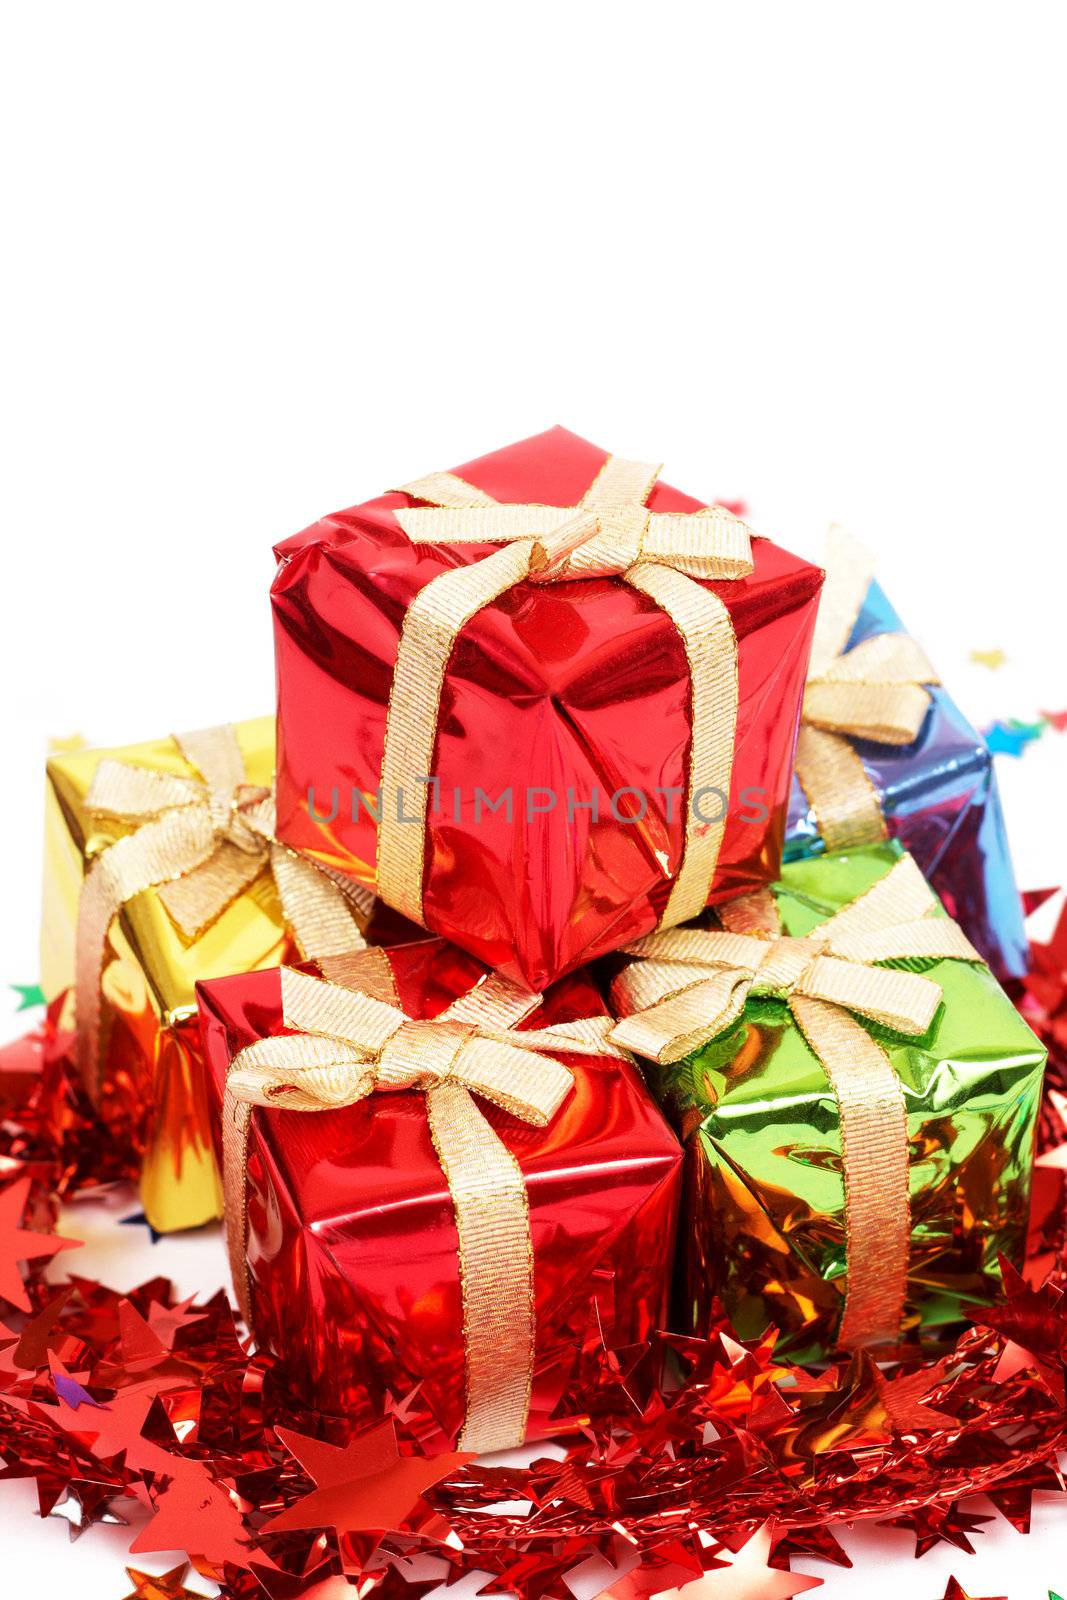 Stack of Christmas gifts by Elenat